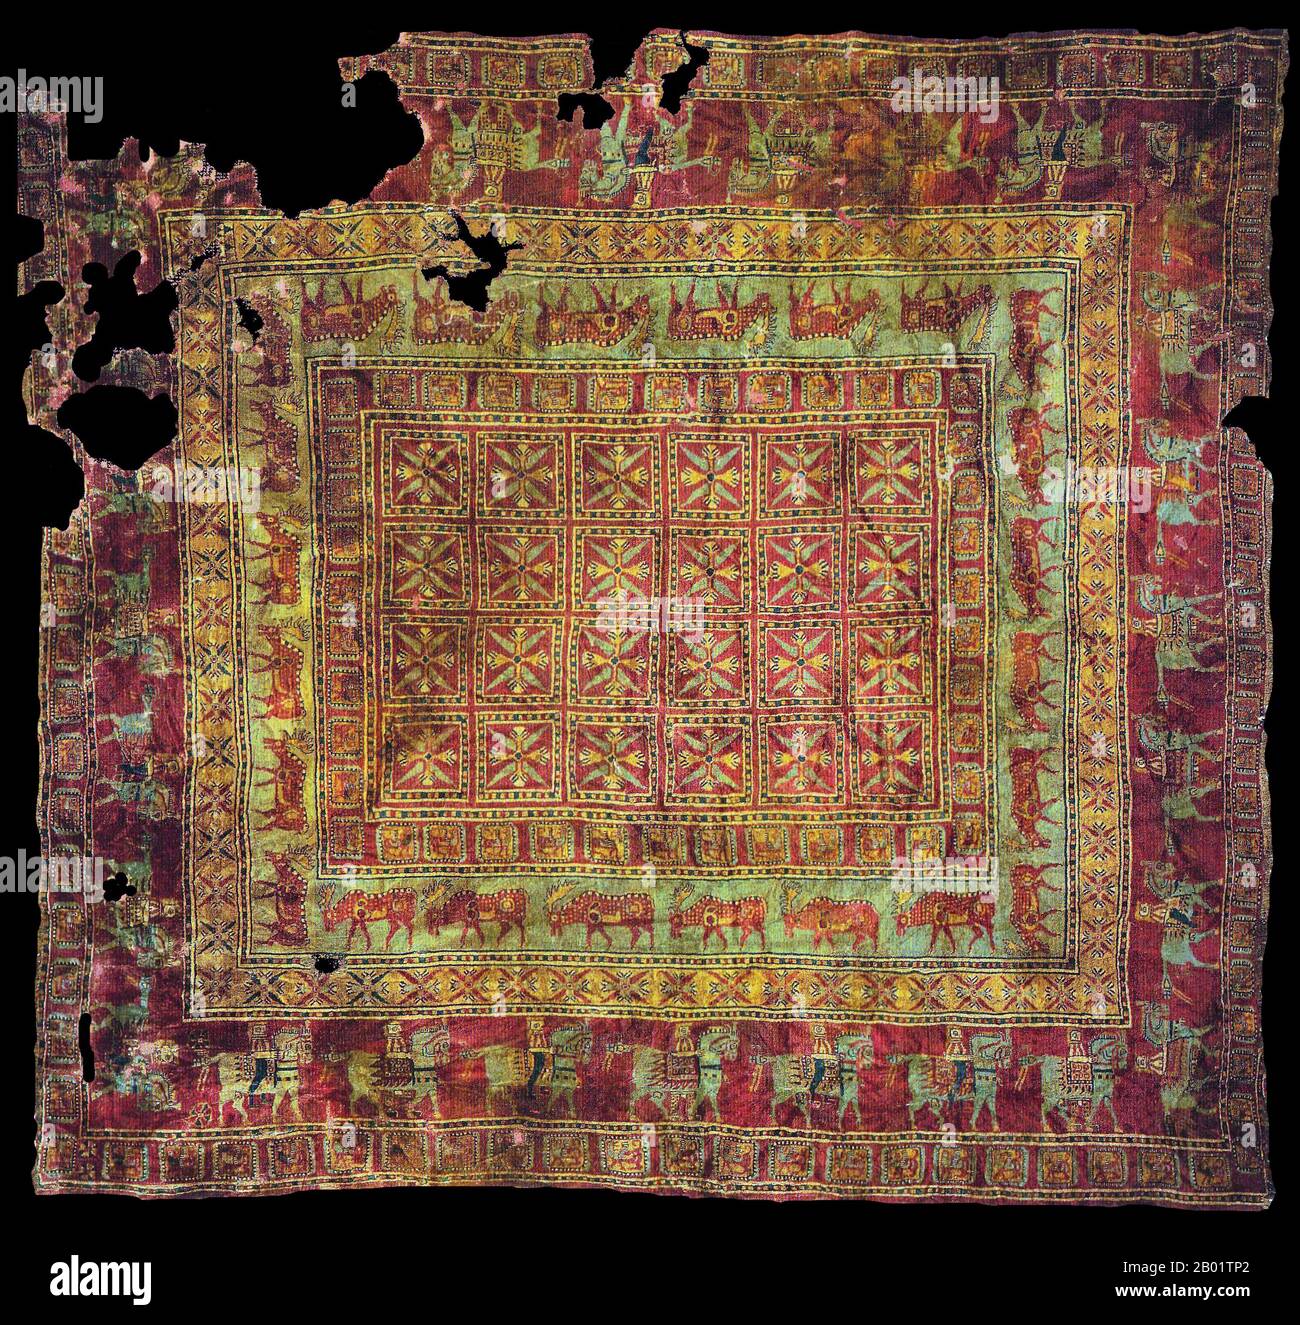 Russia: The Pazyryk carpet, the oldest known woven carpet in the world. Eastern Altai, Pazyryk Burial Mound 5, 5th-4th centuries BCE.  The Pazyryk burials are a number of Iron Age tombs found in the Pazyryk Valley of the Ukok plateau in the Altai Mountains, Siberia, south of the modern city of Novosibirsk, Russia; the site is close to the borders with China, Kazakhstan and Mongolia.  The tombs are Scythian-type kurgans, barrow-like tomb mounds containing wooden chambers covered over by large cairns of boulders and stones, dated to between the 6th and 3rd centuries BCE. Stock Photo